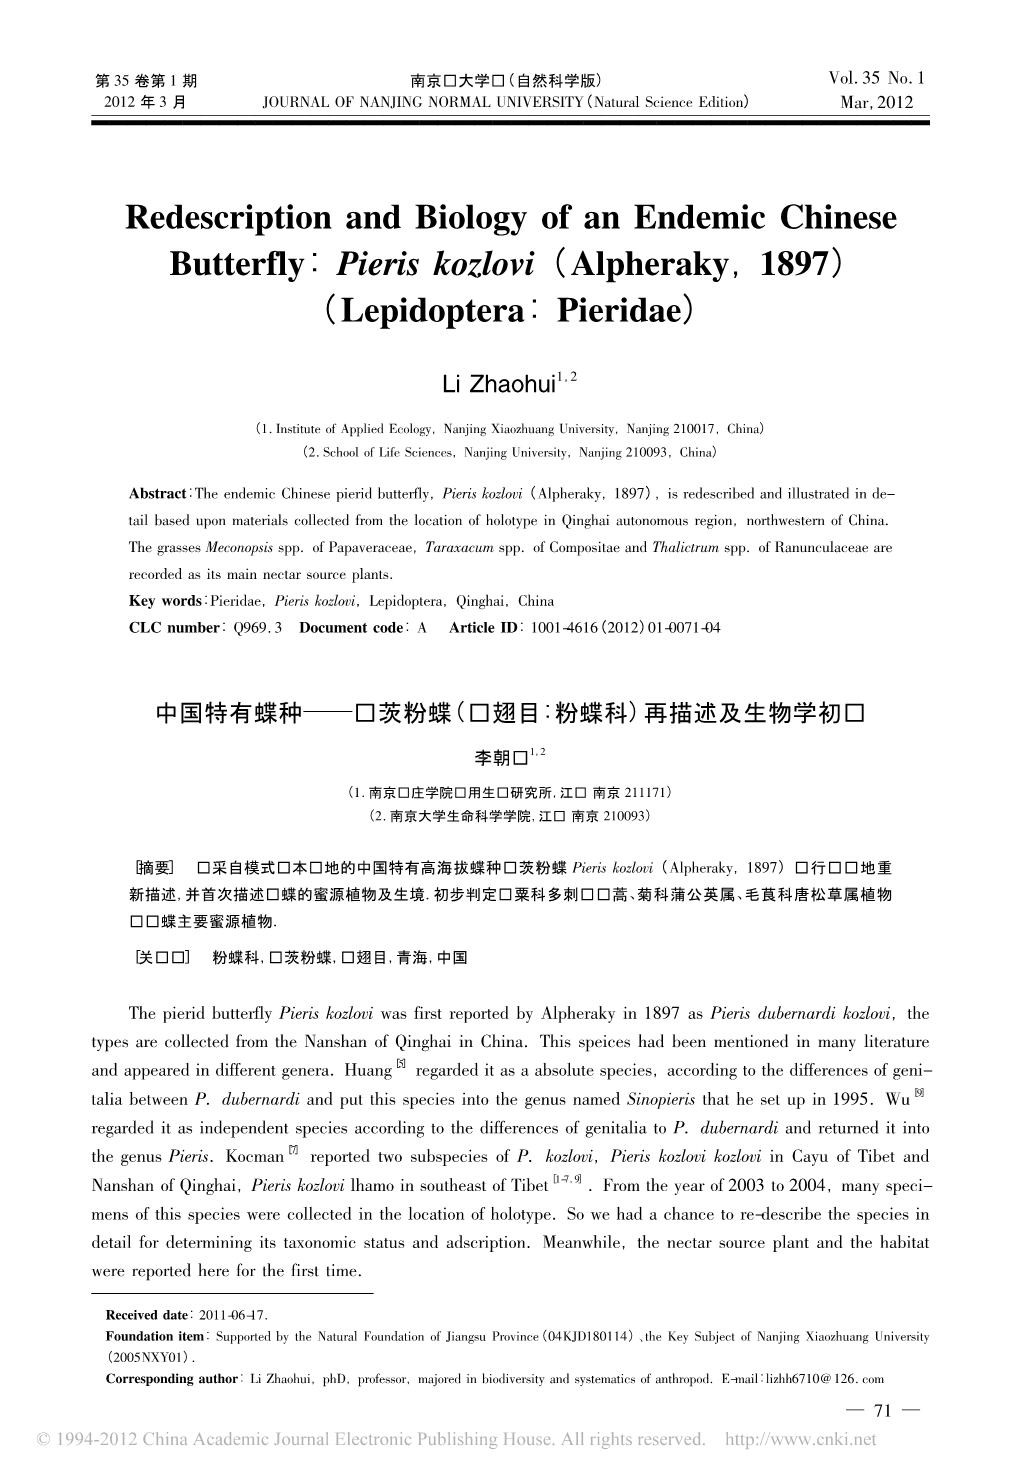 Redescription and Biology of an Endemic Chinese Butterfly： Pieris